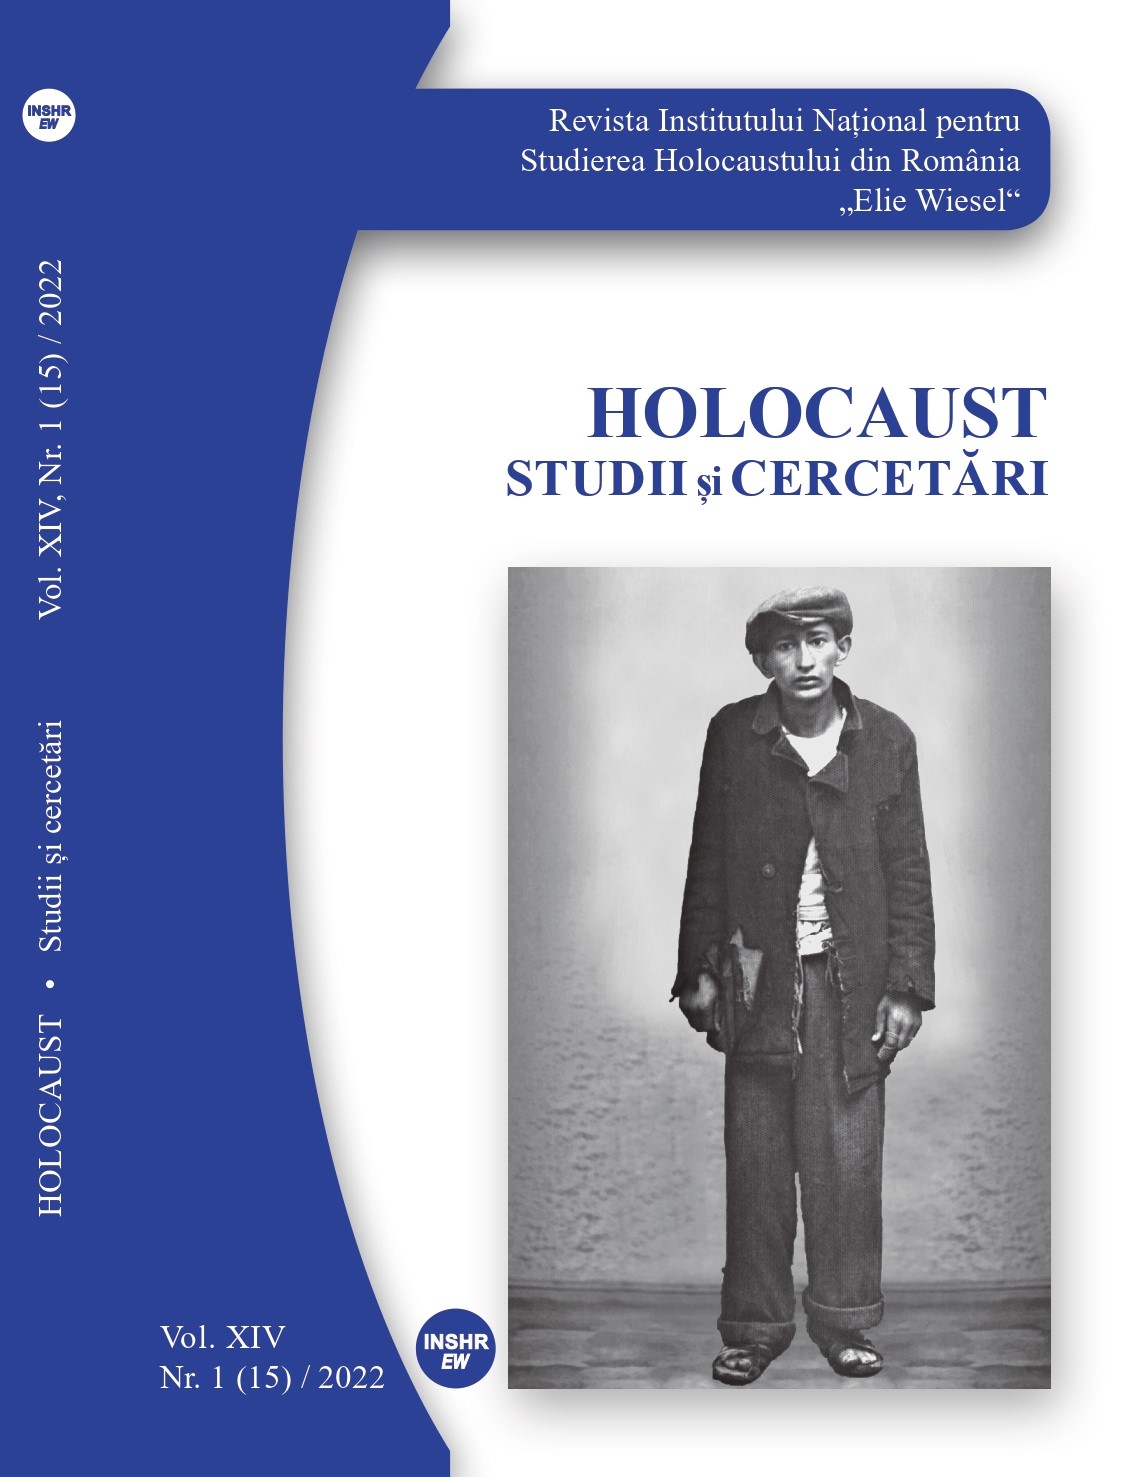 The Holocaust in the Memory of the Inhabitants and Public Authorities of Vad, a Rural Commune in North-Western Roman Cover Image